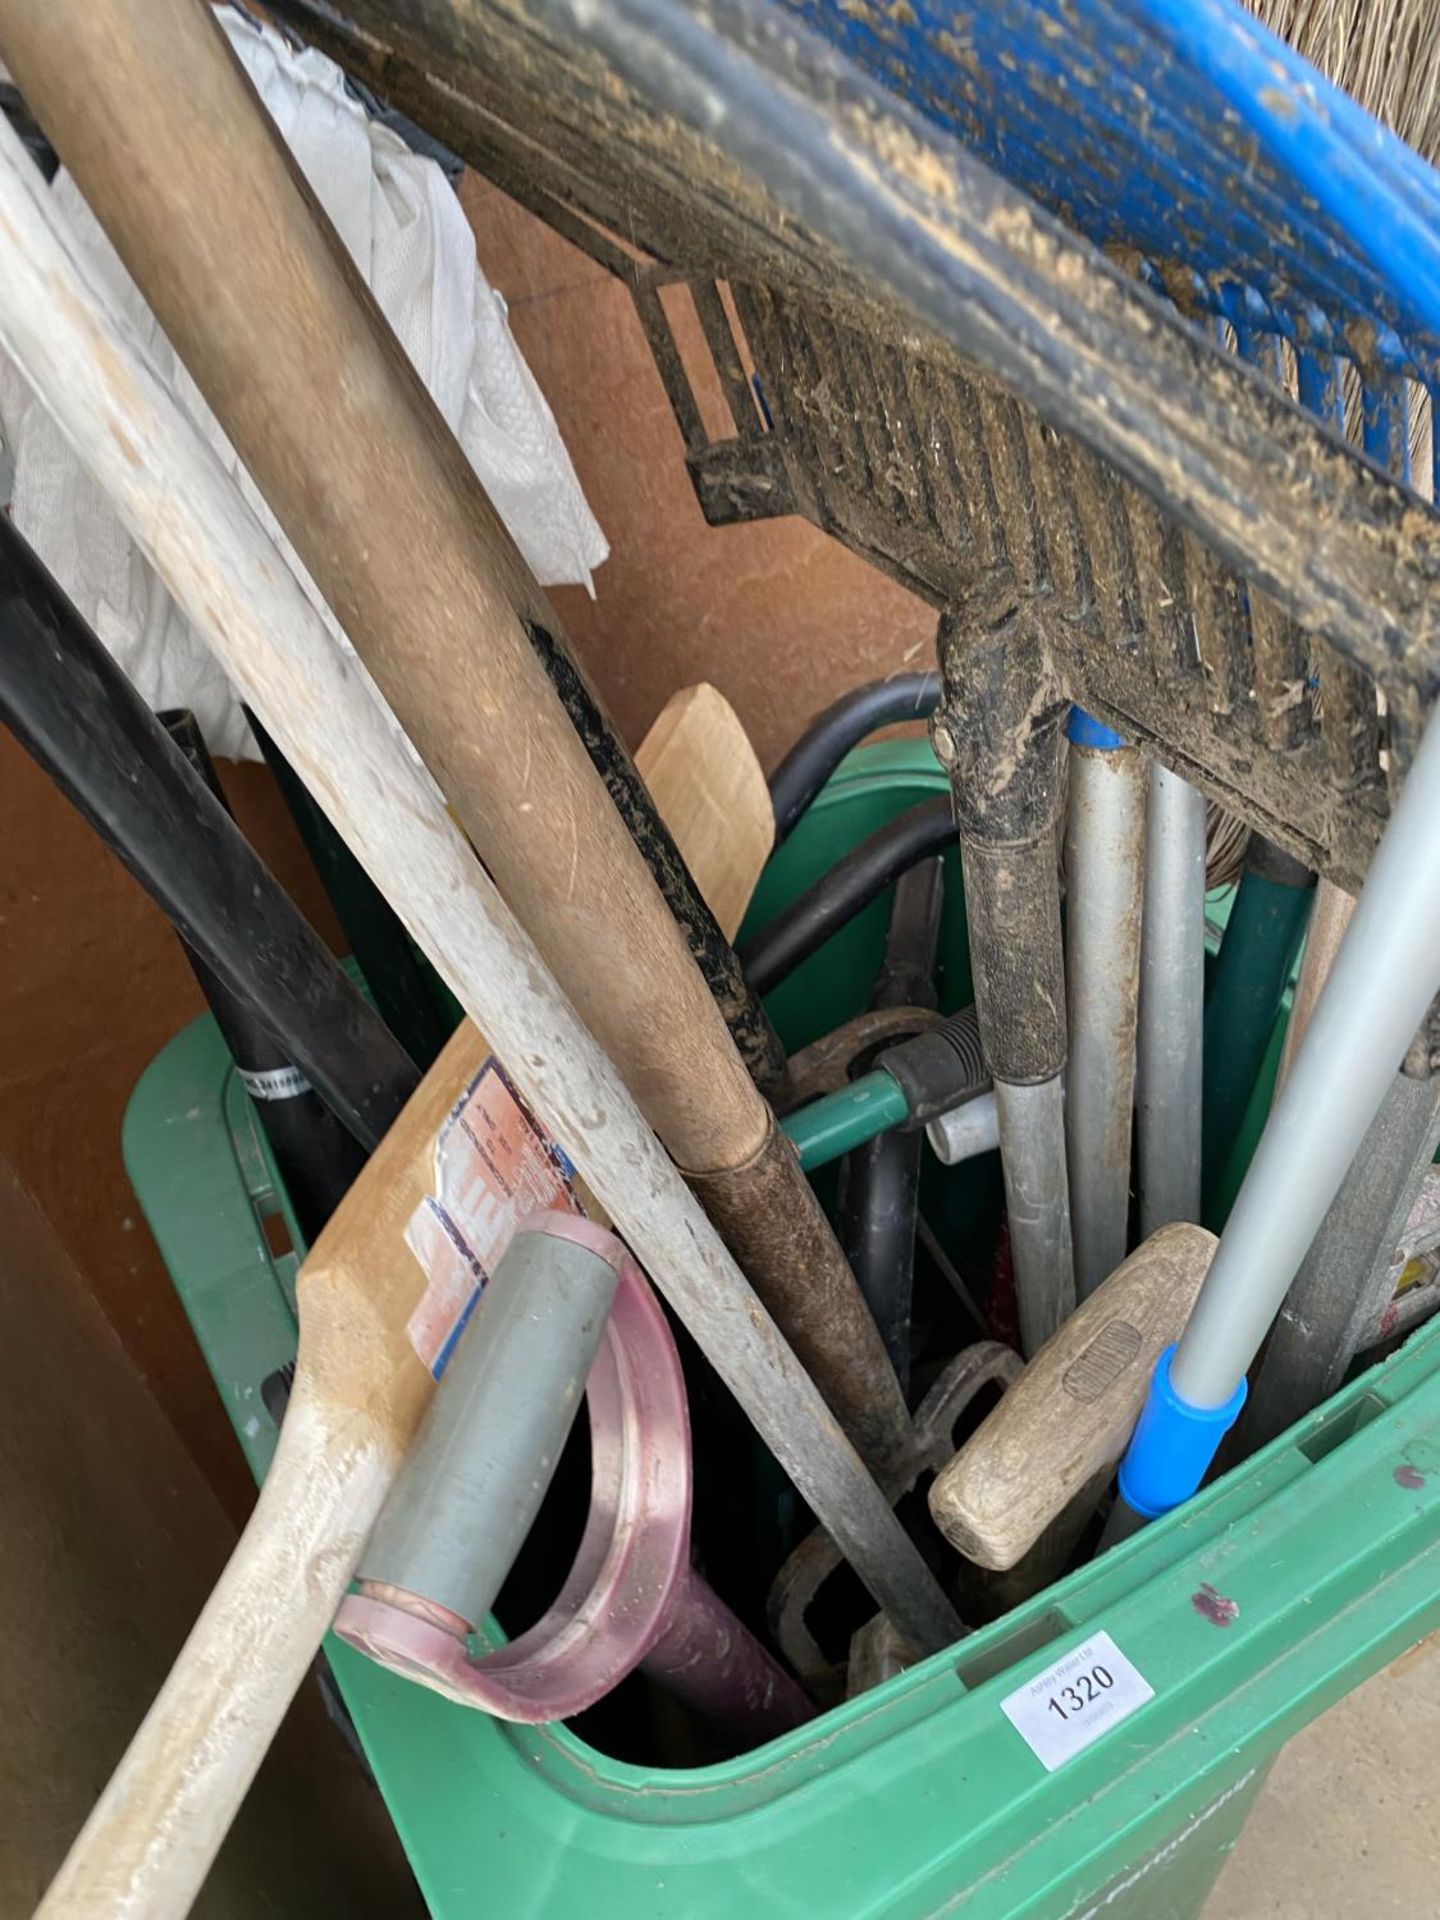 A WHEELIE BIN CONTAINING AN ASSORTMENT OF GARDEN TOOLS TO INCLUDE FORKS AND RAKES ETC - Image 3 of 4